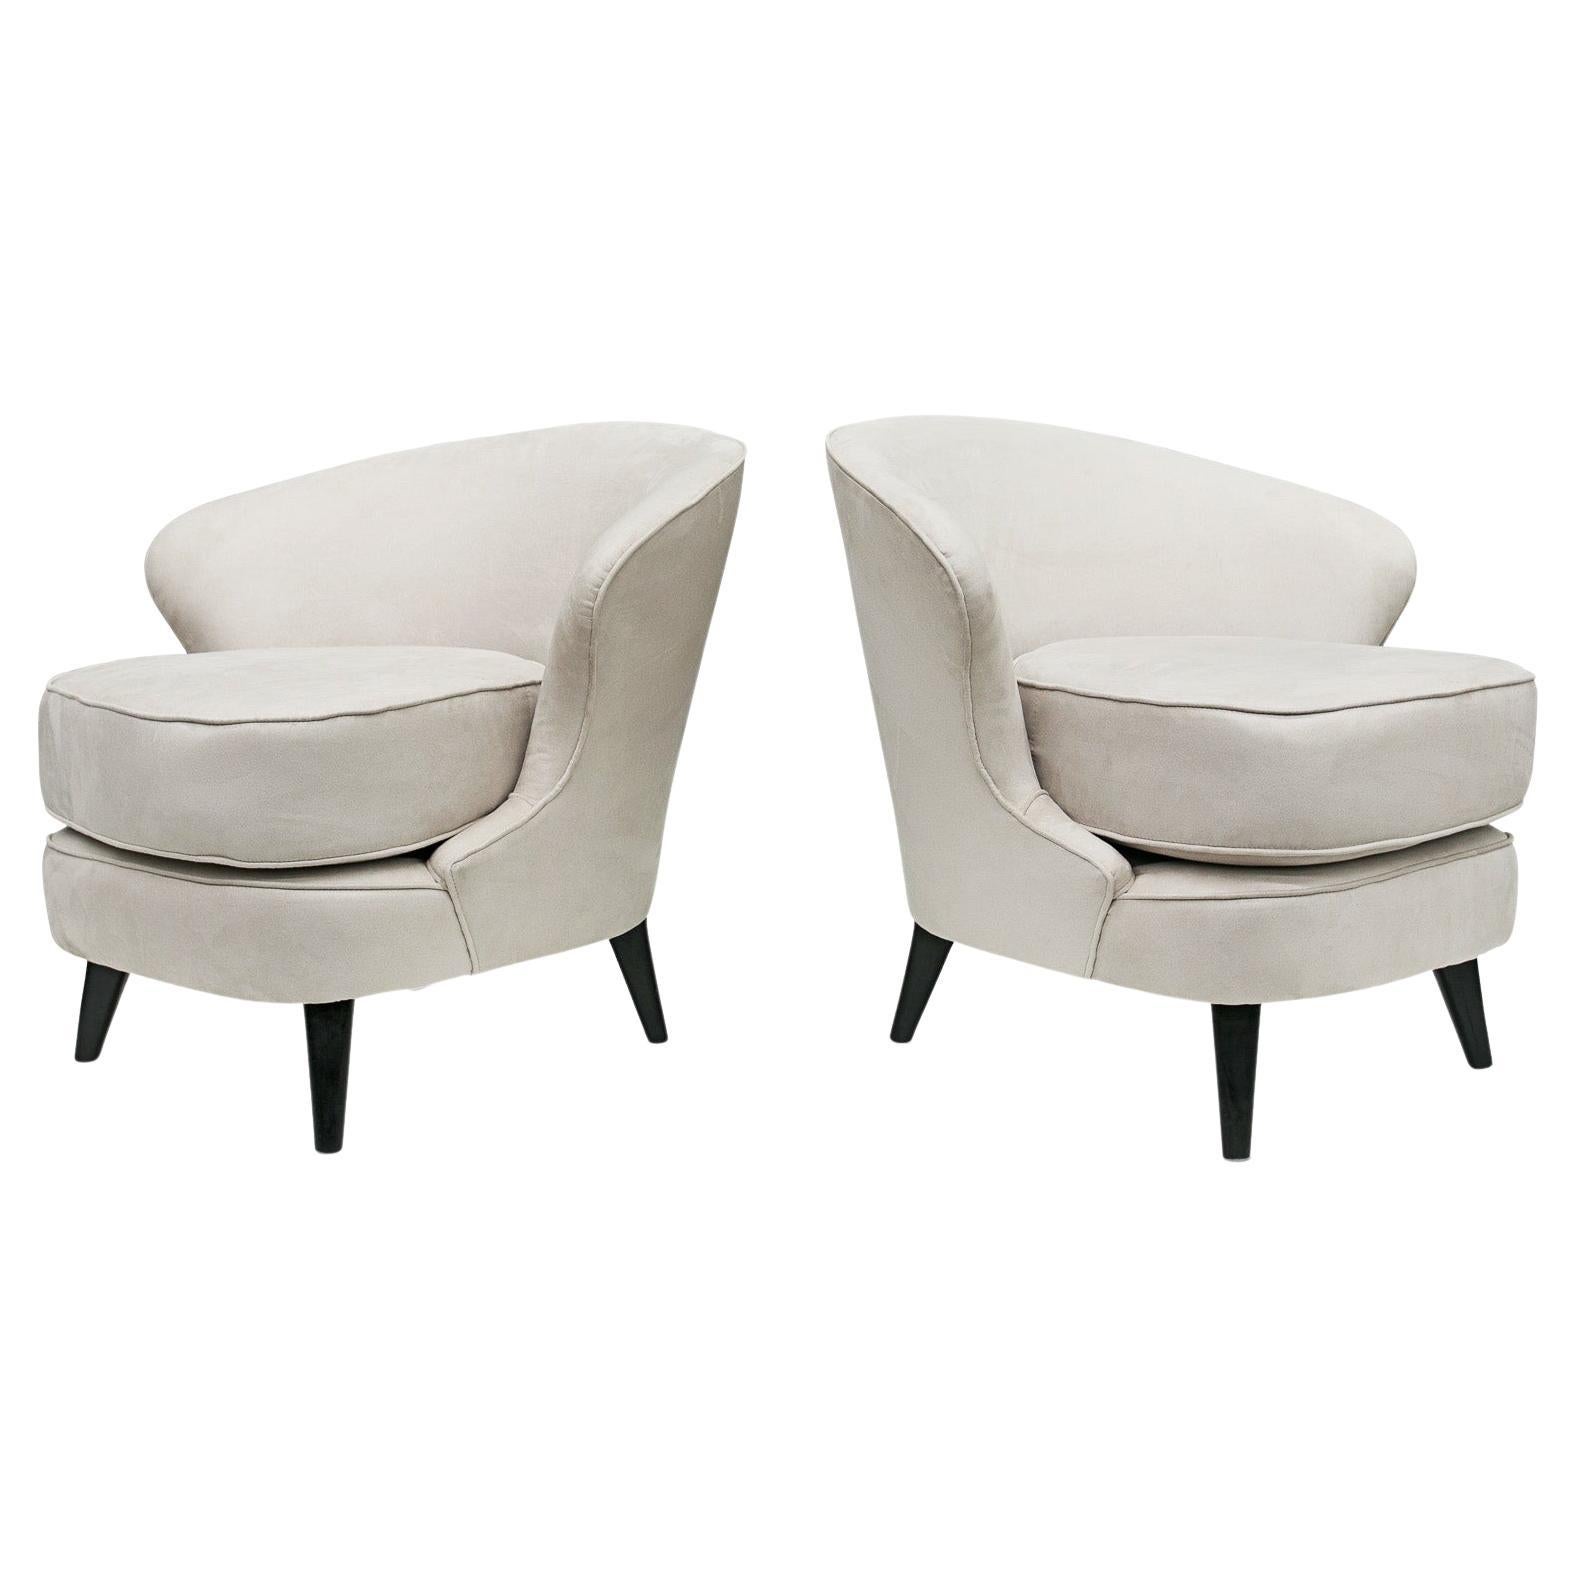 Available right now, this very Brazilian Modern armchair pair in hardwood and gray suede designed by Joaquim Tenreiro in the sixties is gorgeous!
 
The model is called “Concha” (Shell in Portuguese). The armchairs feature a hardwood structure